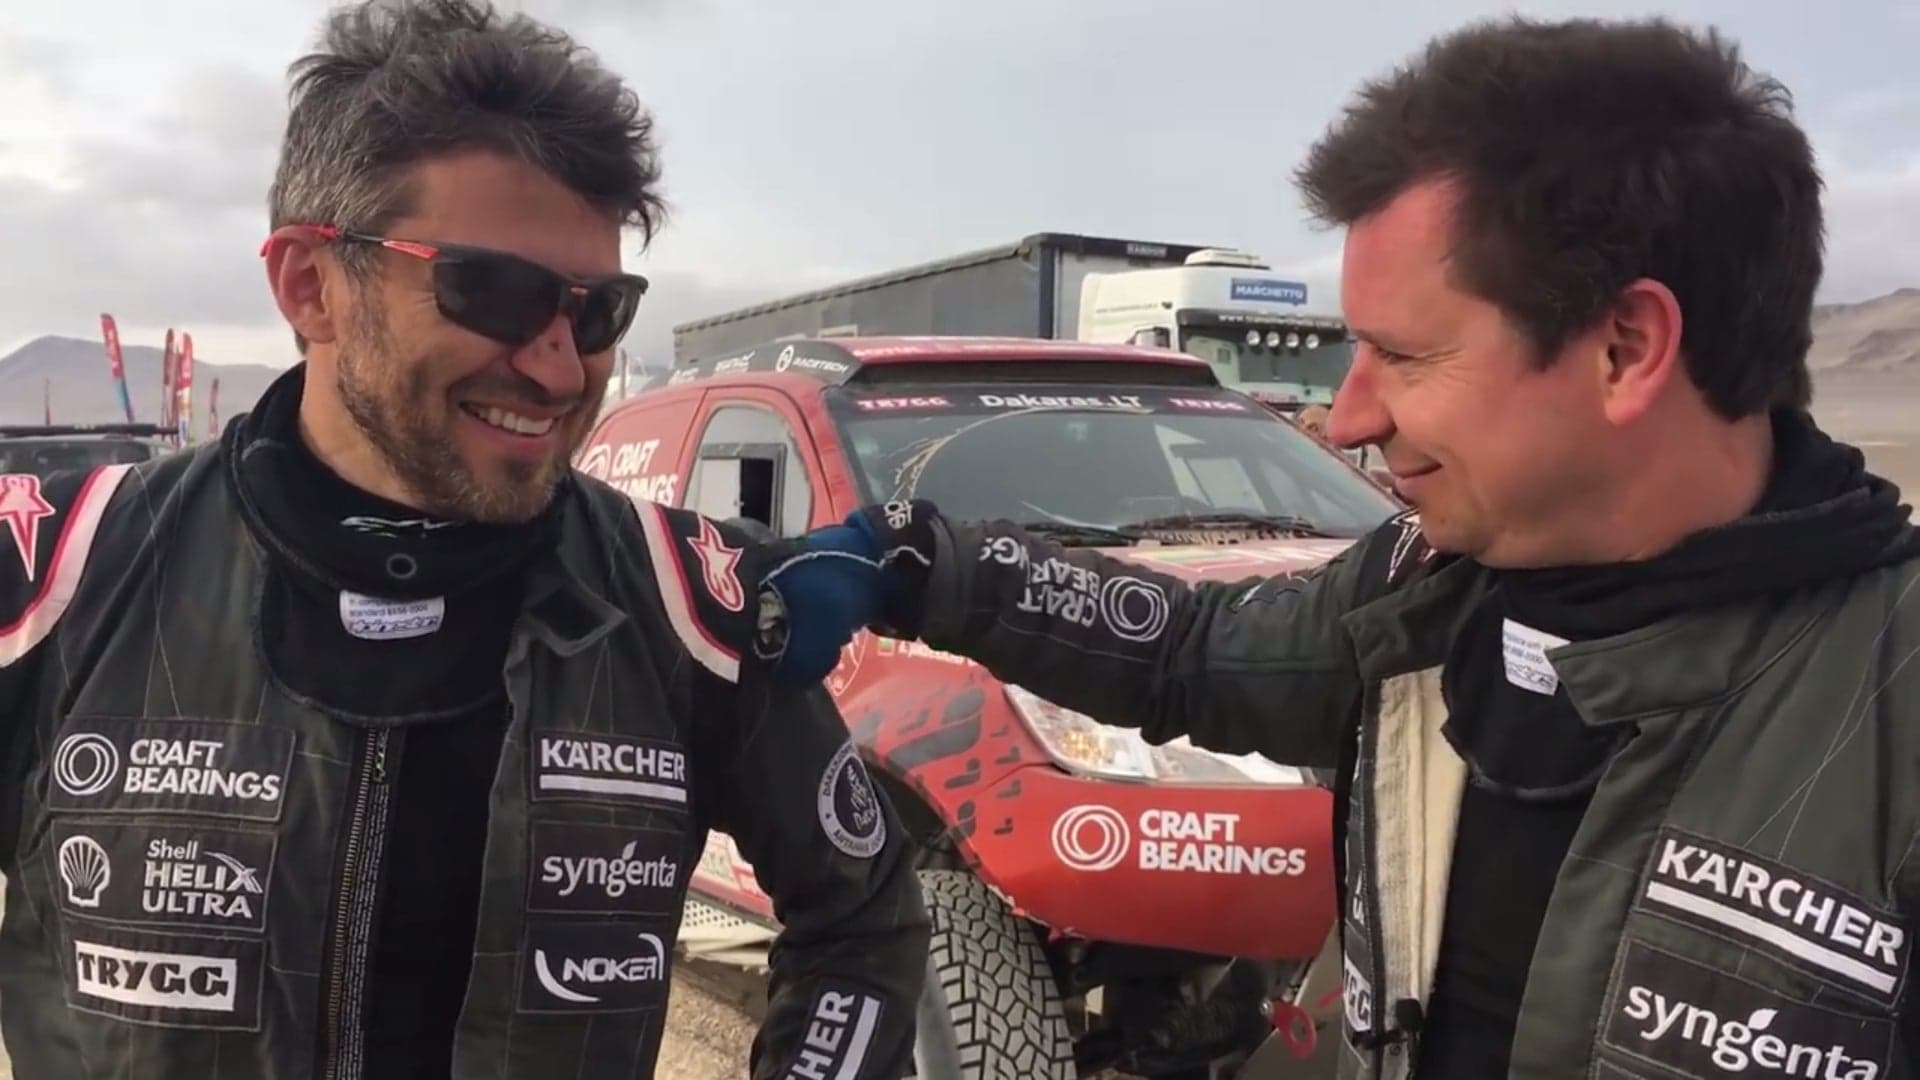 Dakar Rally Team Finishes Stage With Only Front Tires